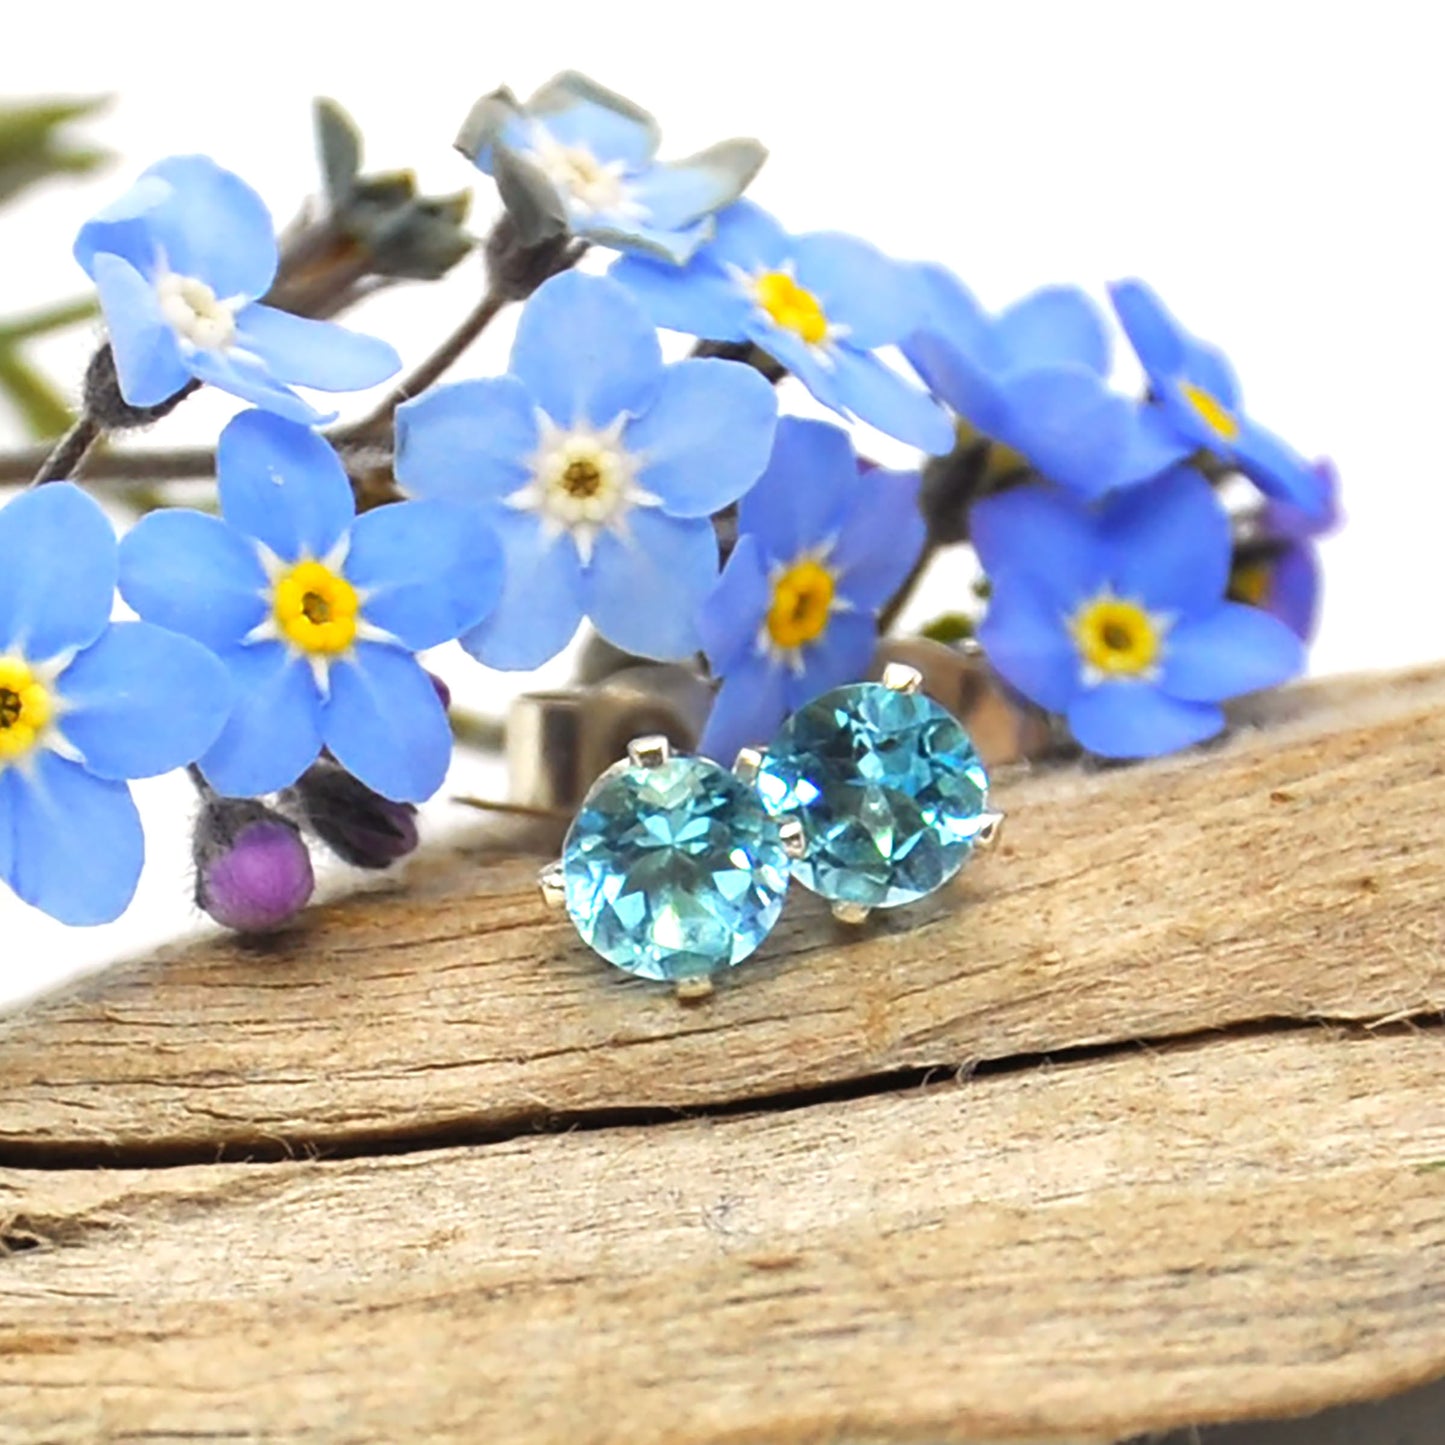 Silver 4 claw stud earrings with bright blue topaz gemstones. Pictured with flowers.